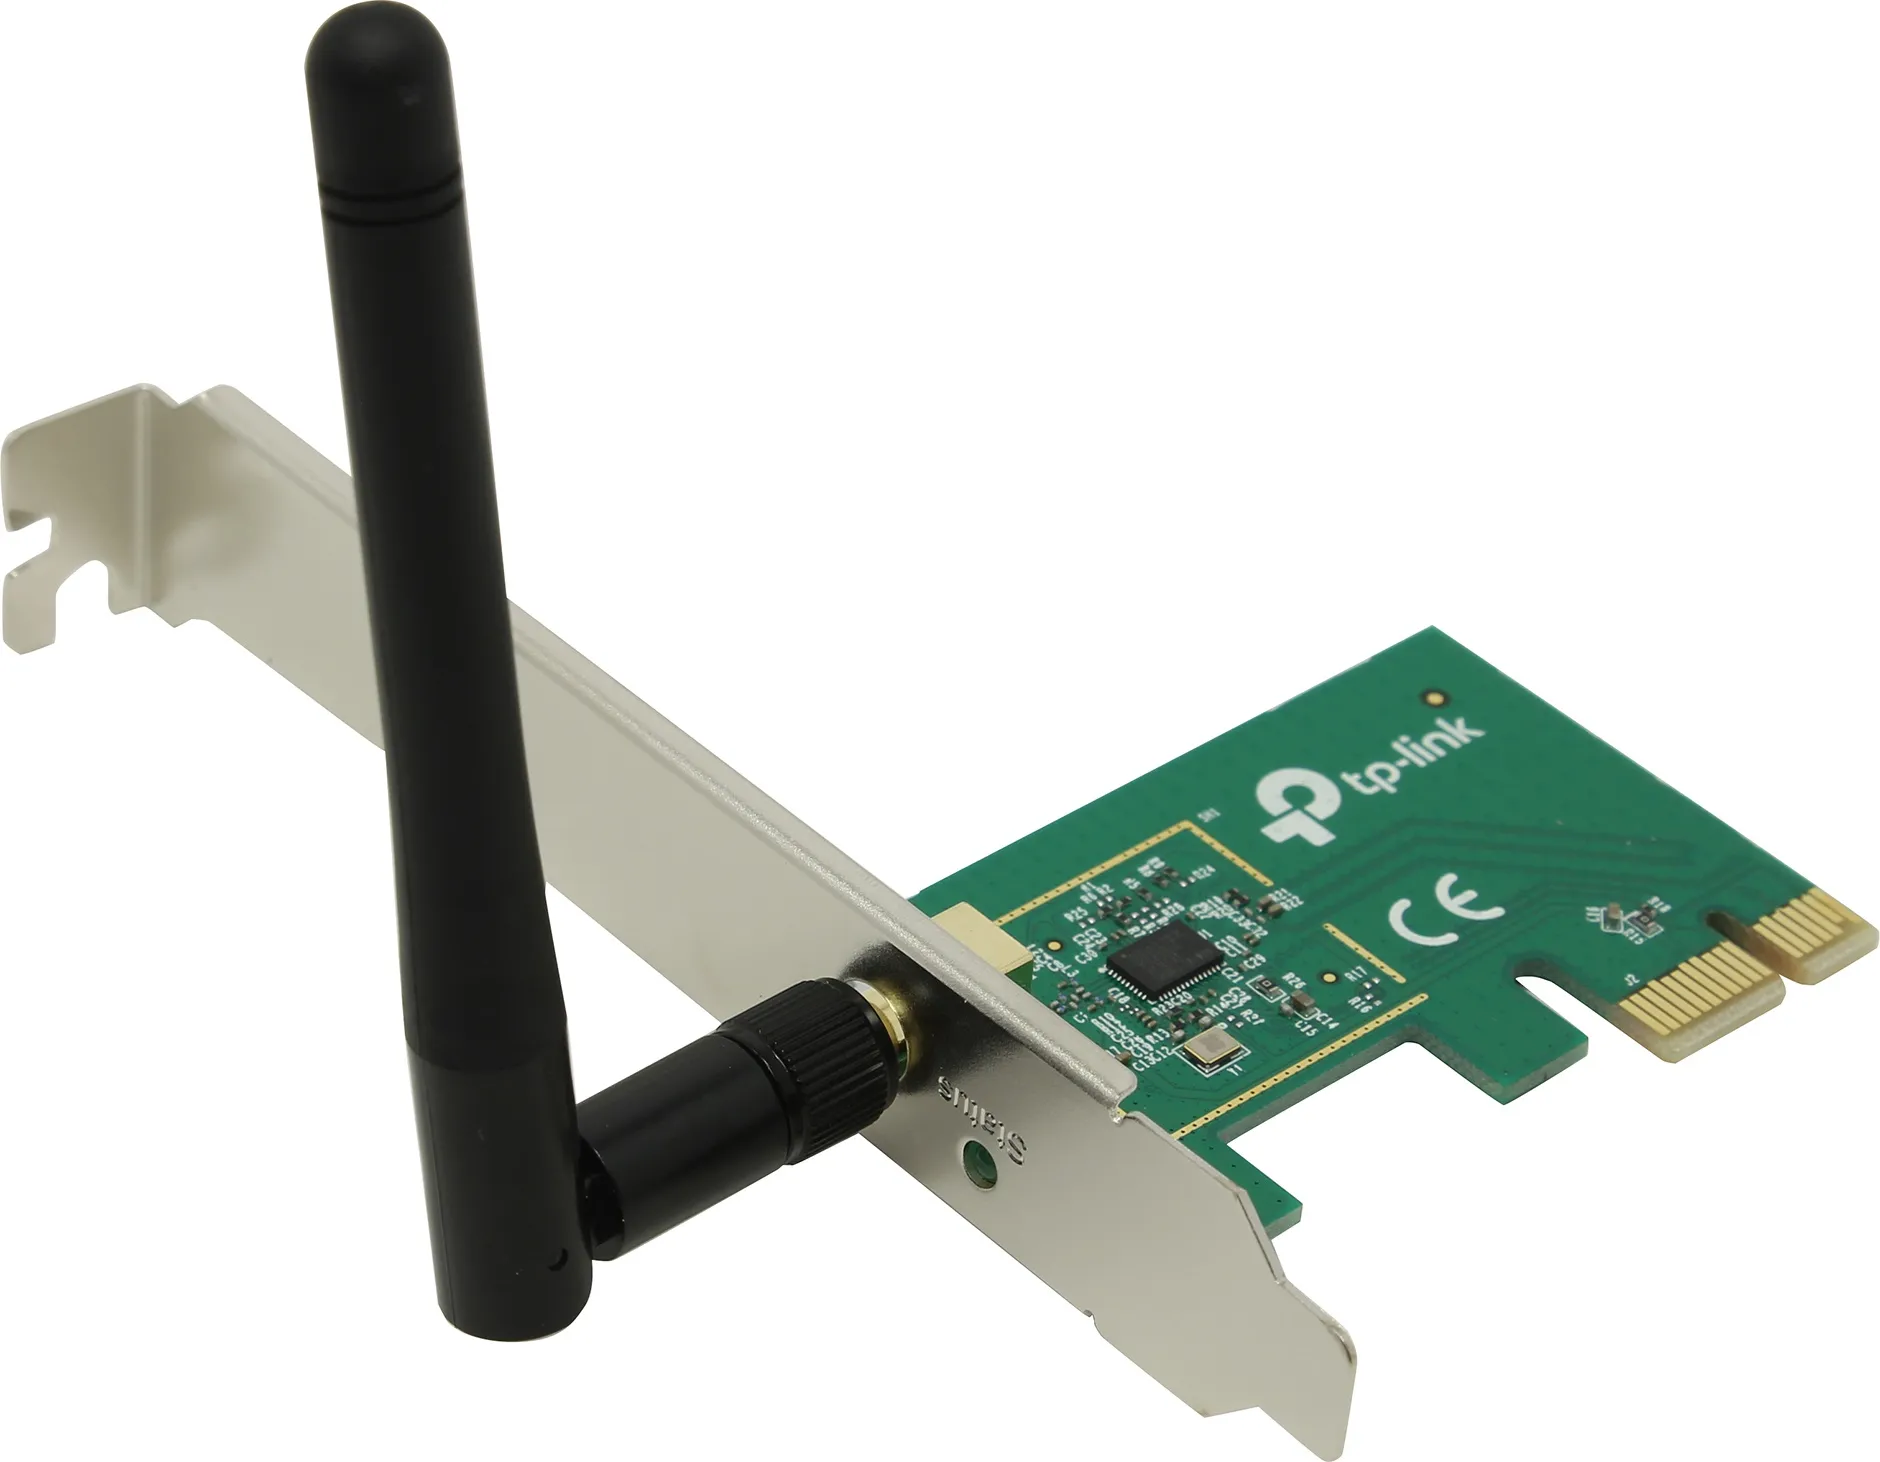 WiFi адаптер TL-WN781ND Wireless N PCI Express Adapter, Atheros, 1T1R, 2.4GHz, compatible with 802.11n/g/b, 1 detachable antenna#6